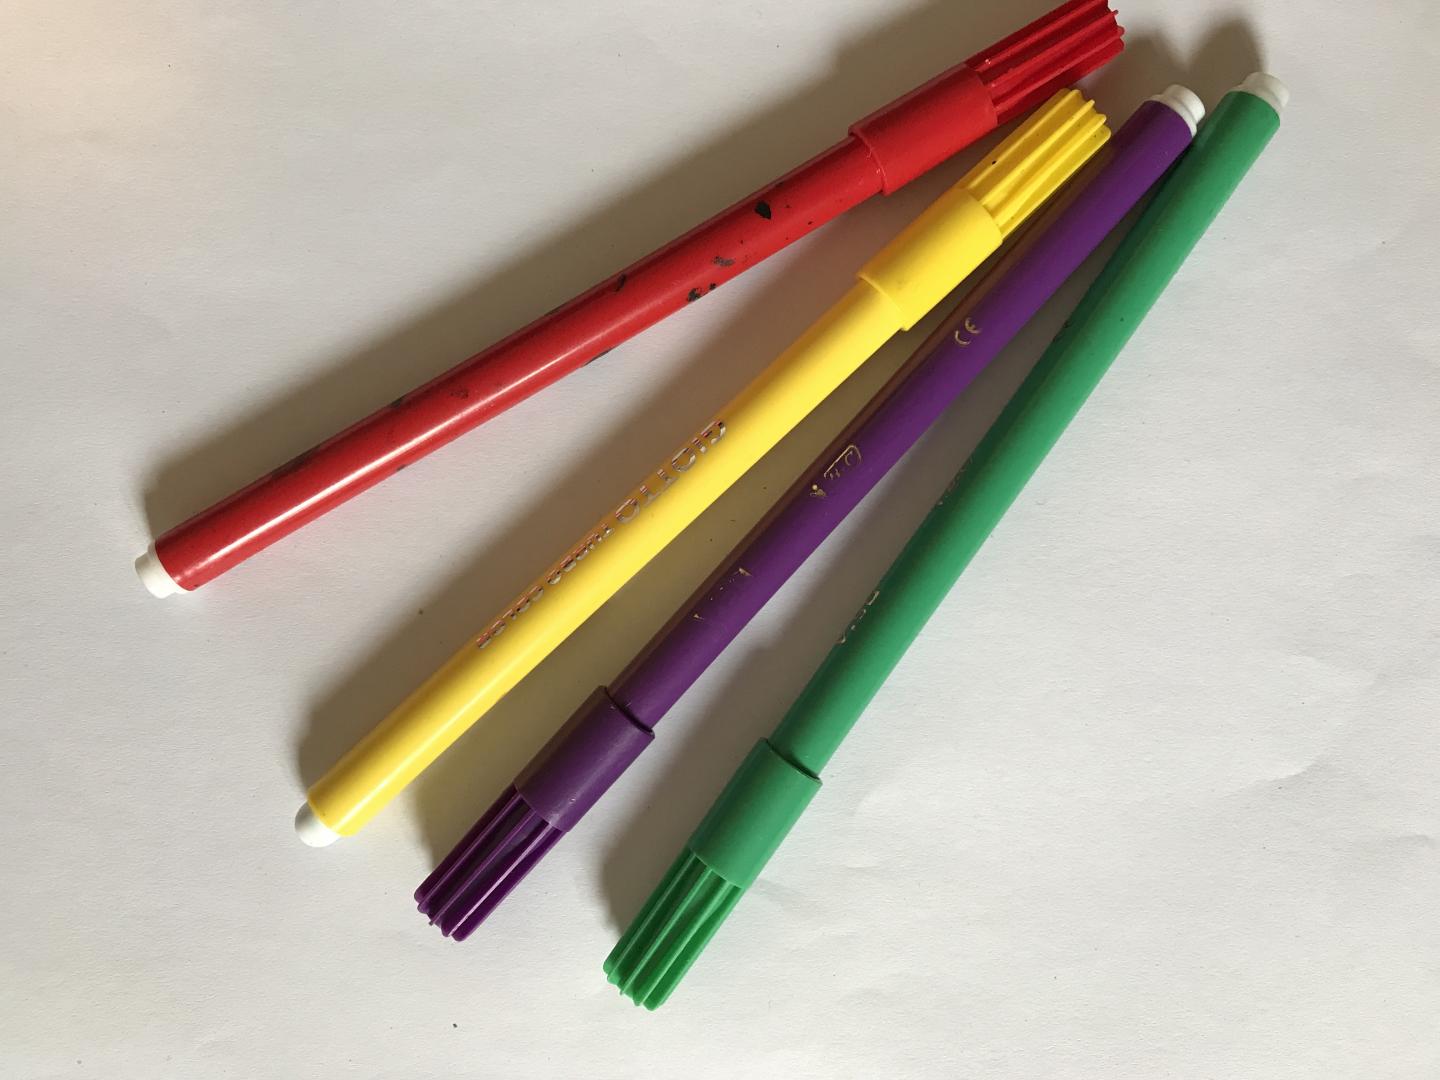 A red, yellow, purple and green felt tip pen.